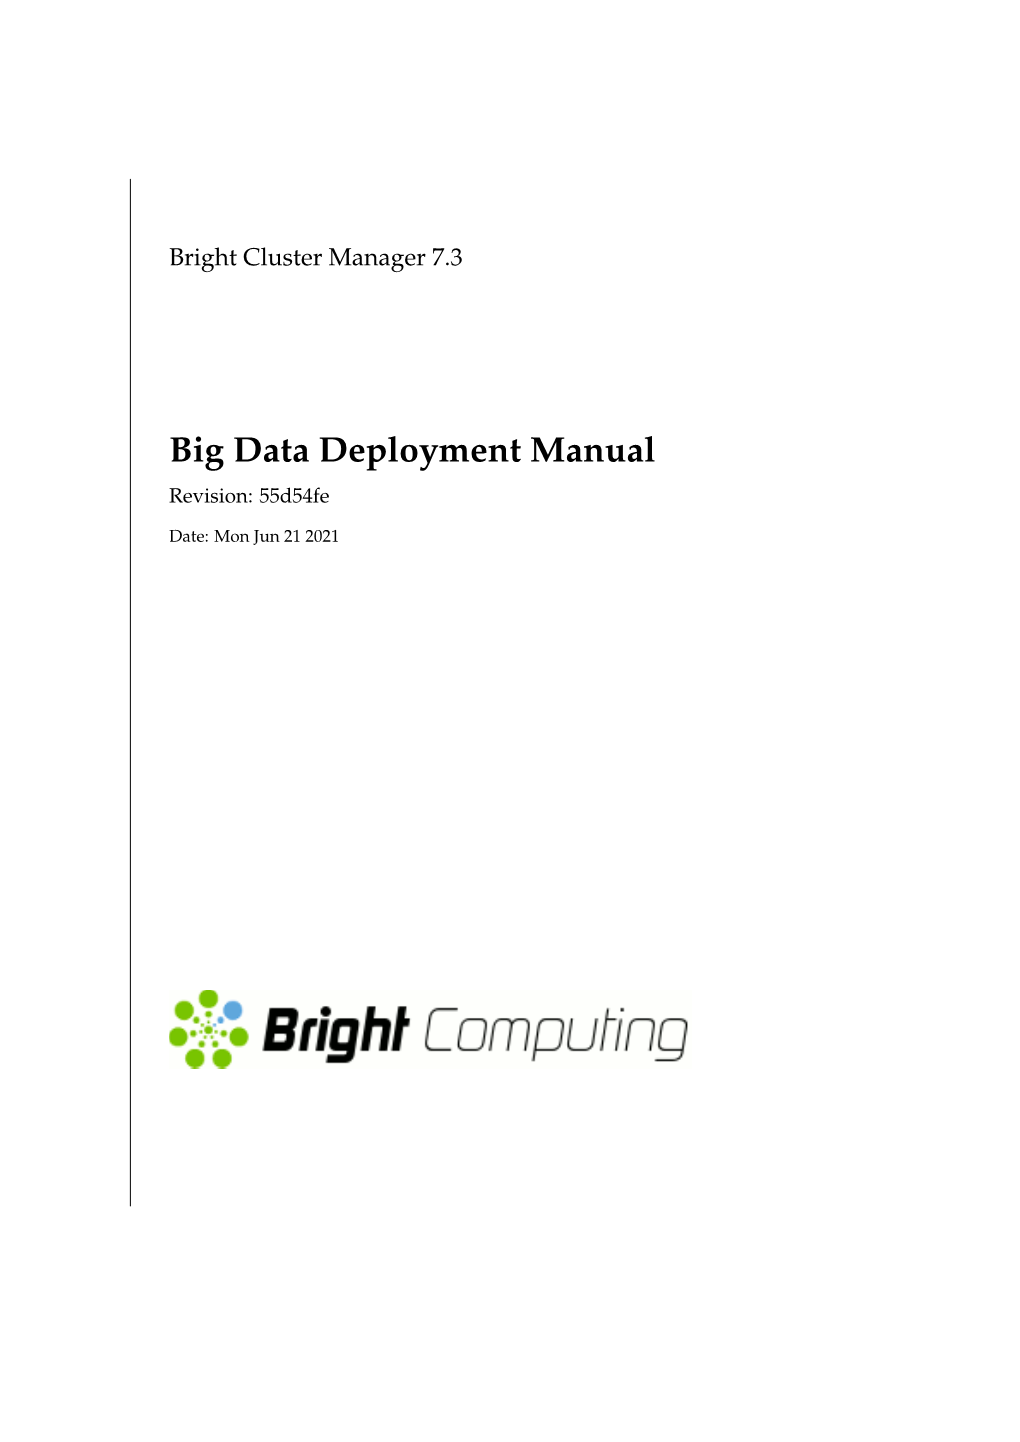 Bright Cluster Manager 7.3 Big Data Deployment Manual